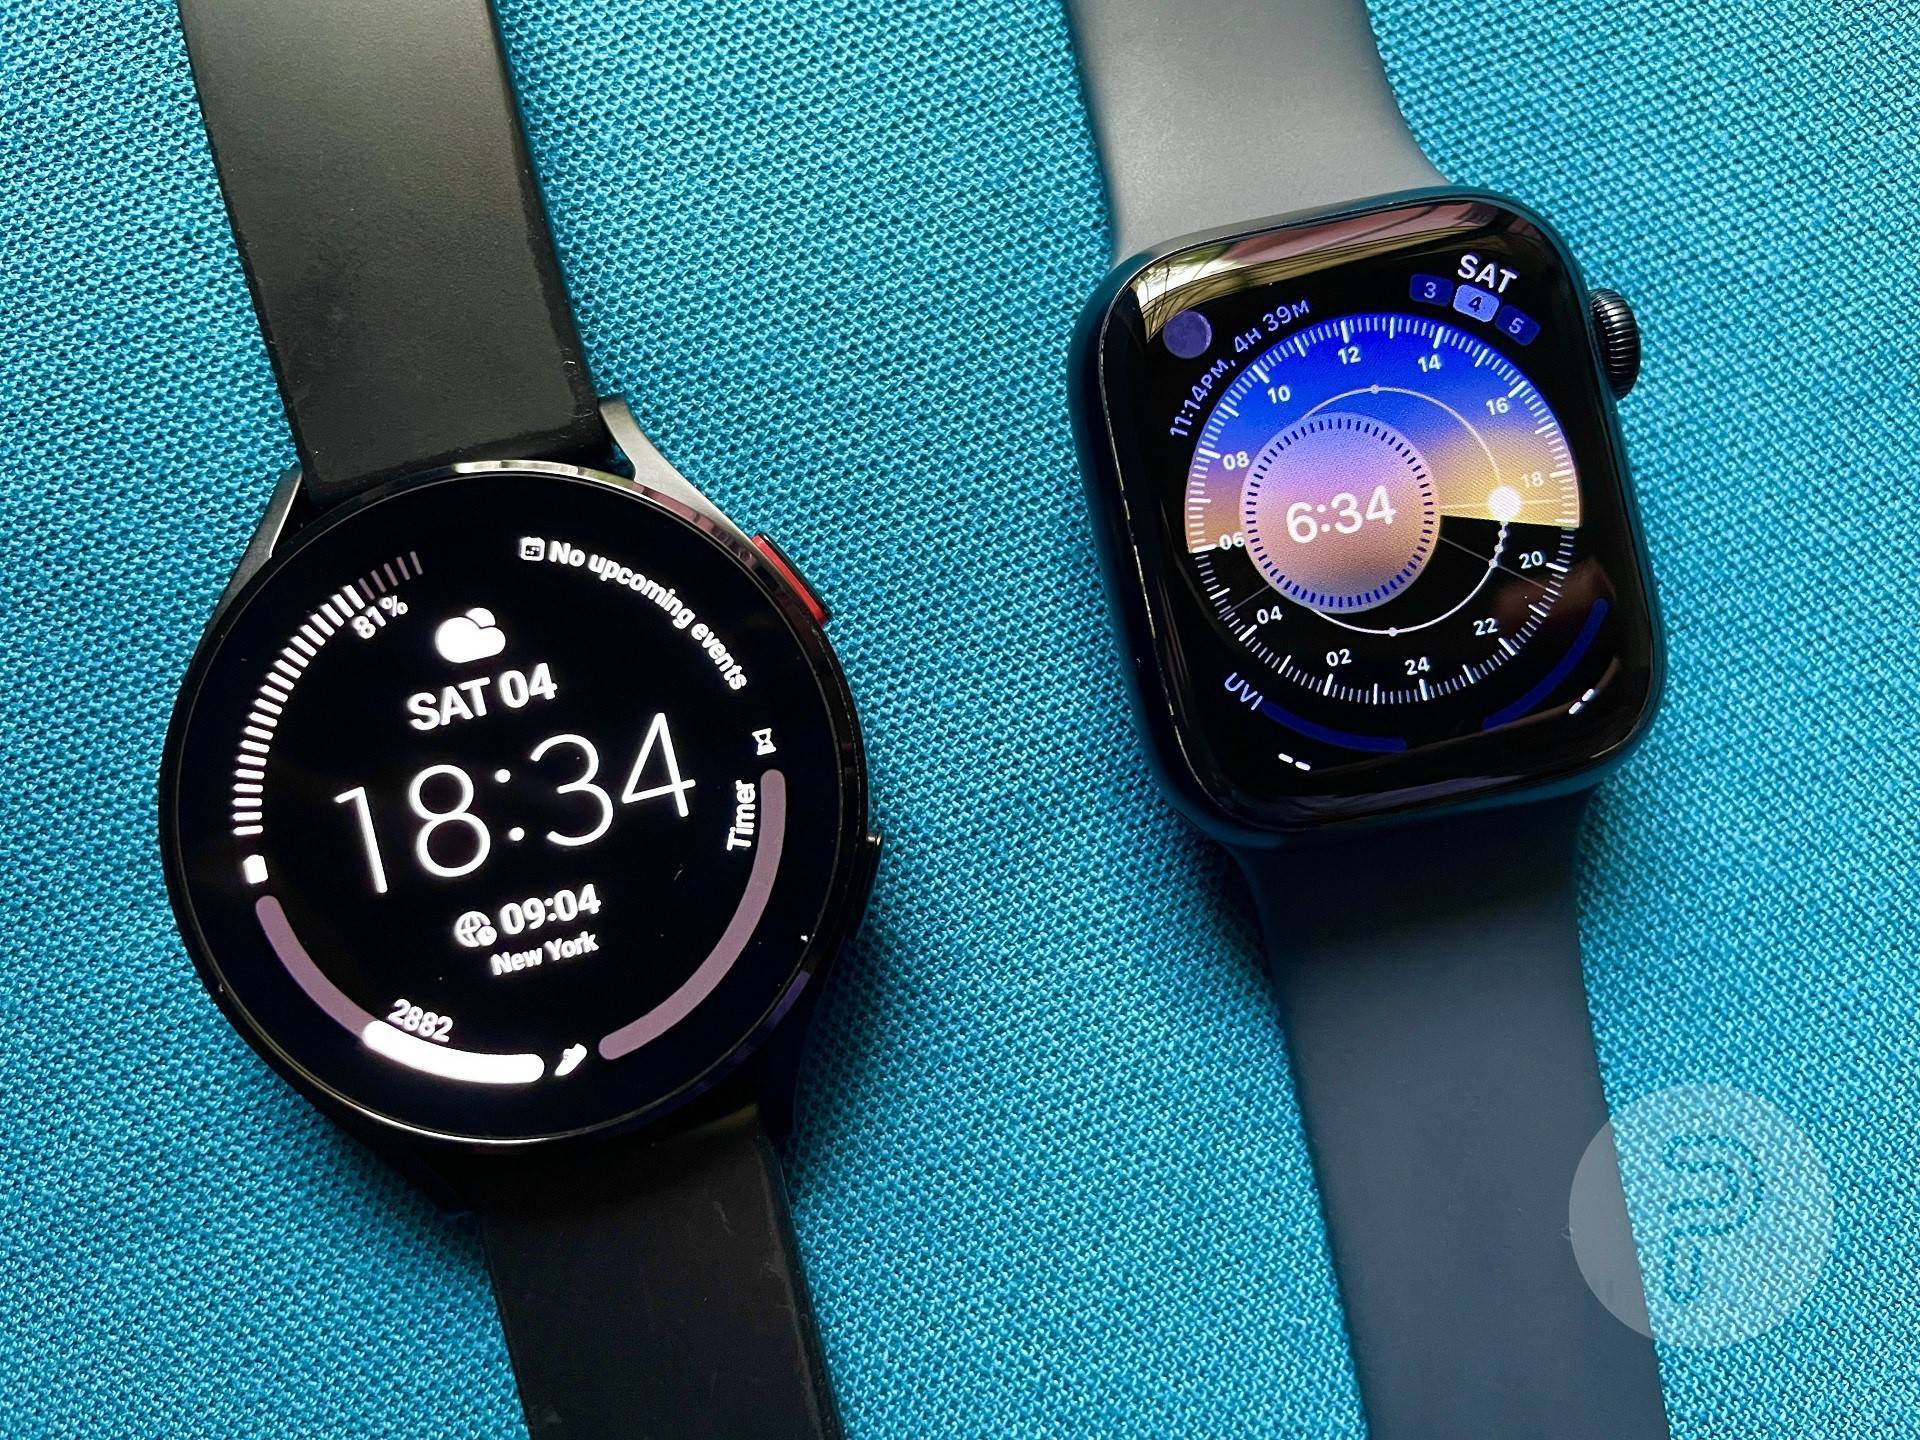 Galaxy Watch 4 and Apple Watch Series 7 placed on a fabric surface